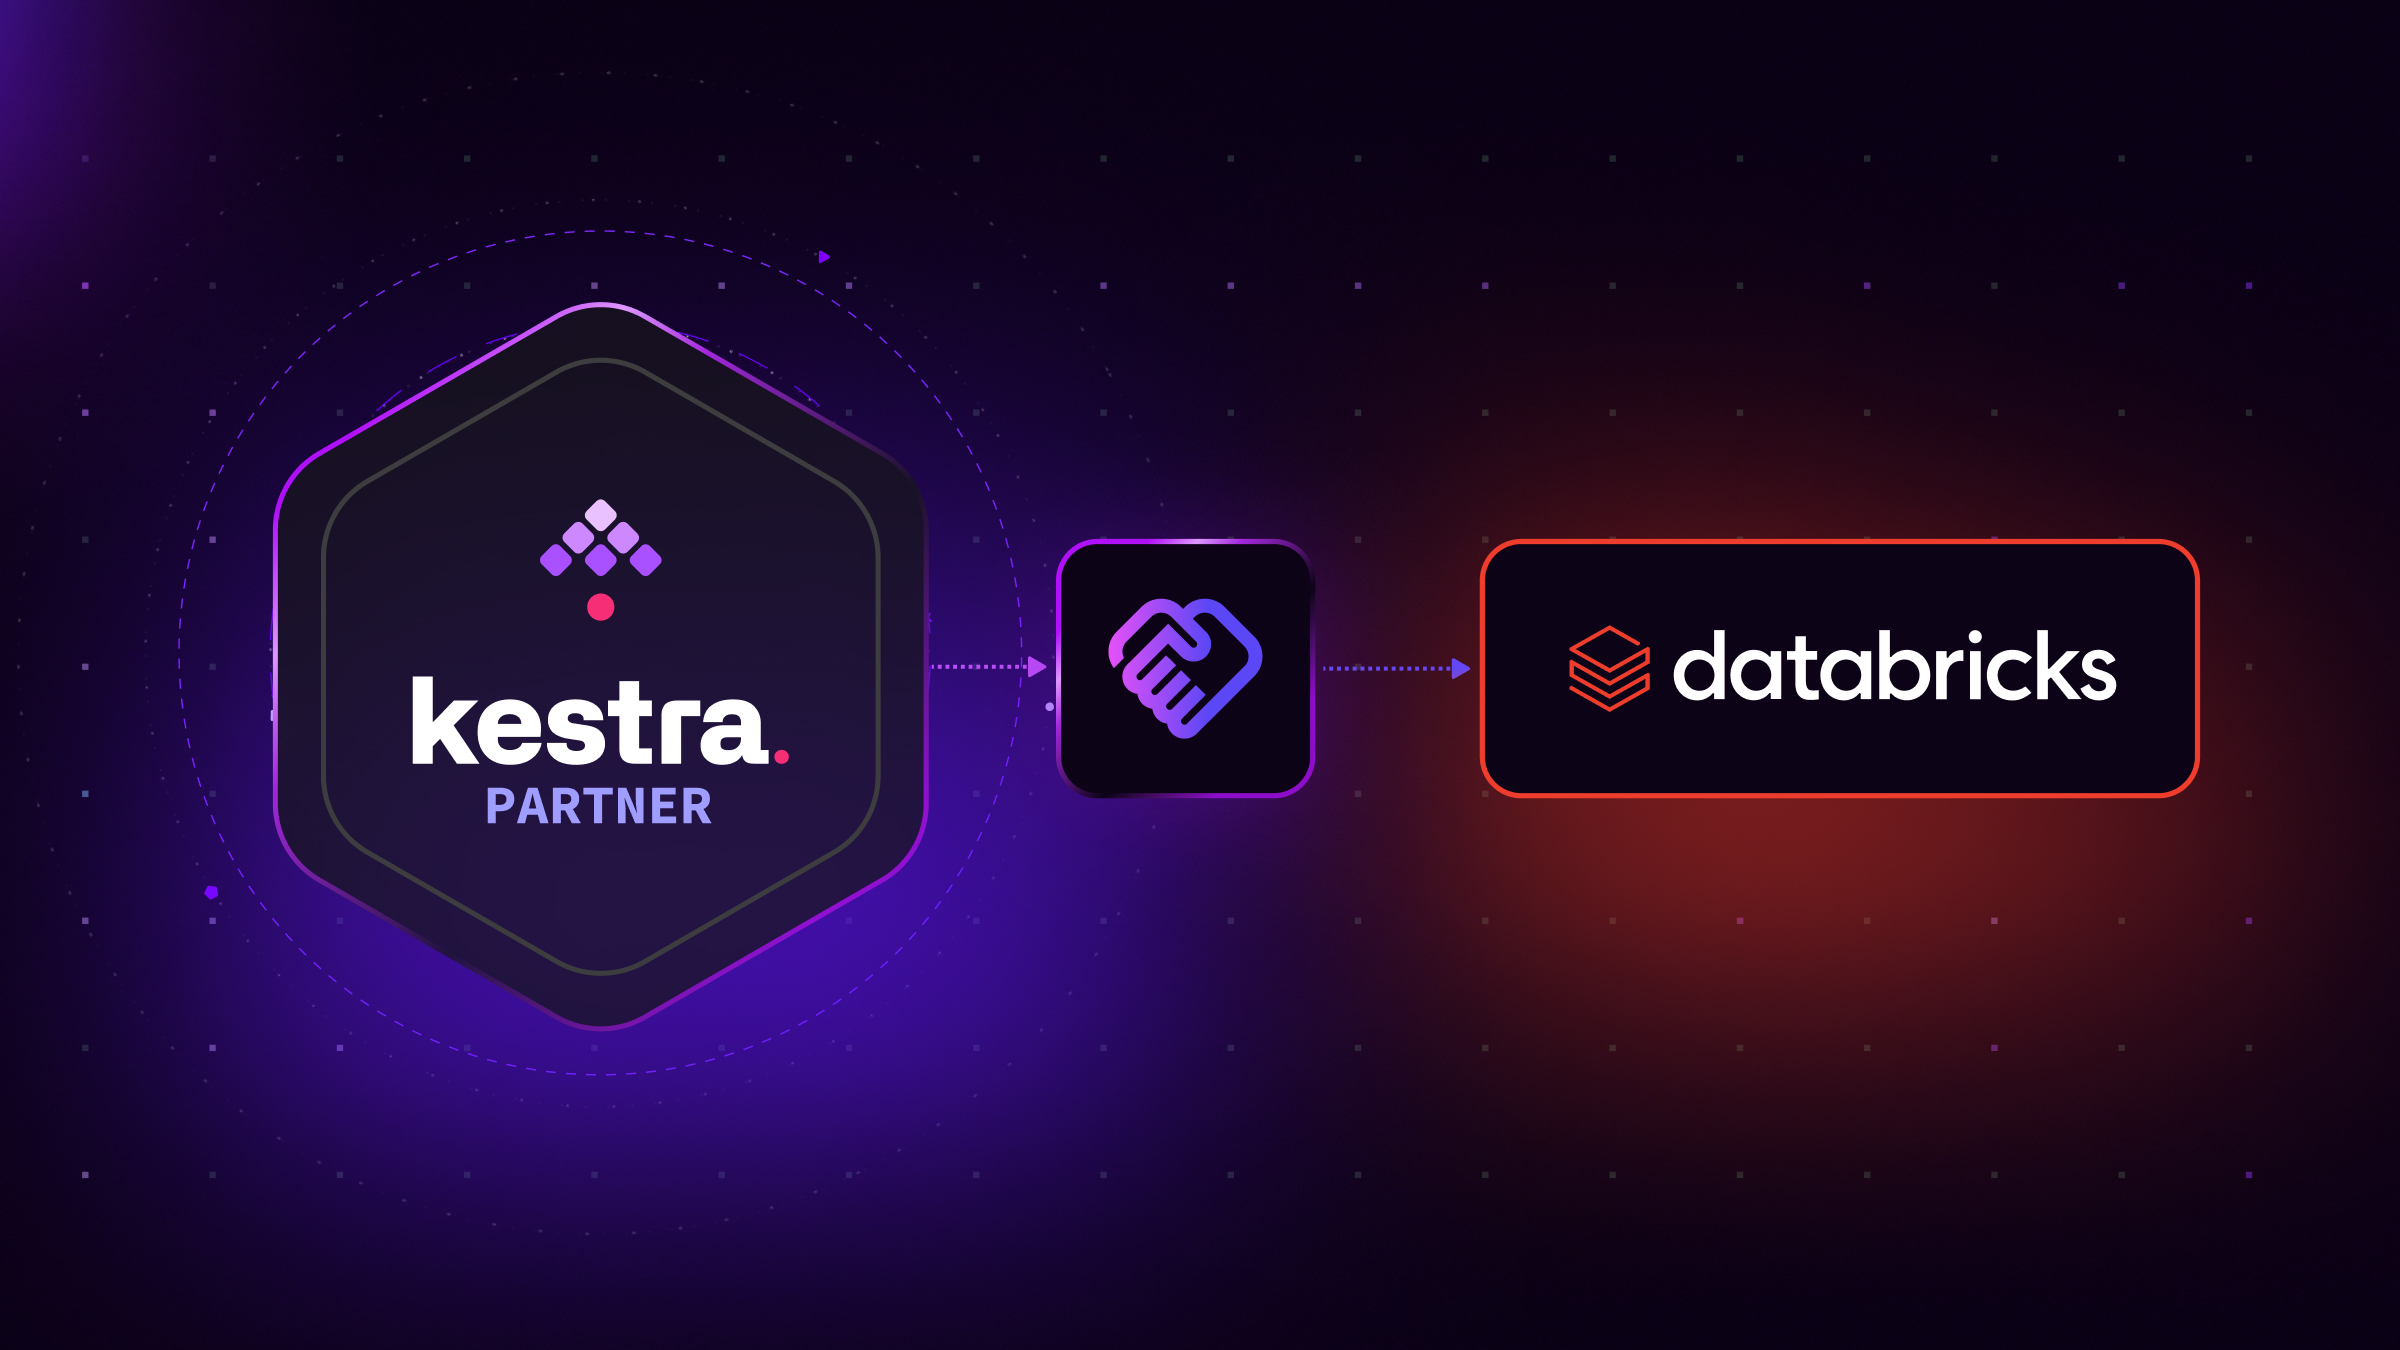 Databricks & Kestra Joining Force in a Technological Partnership